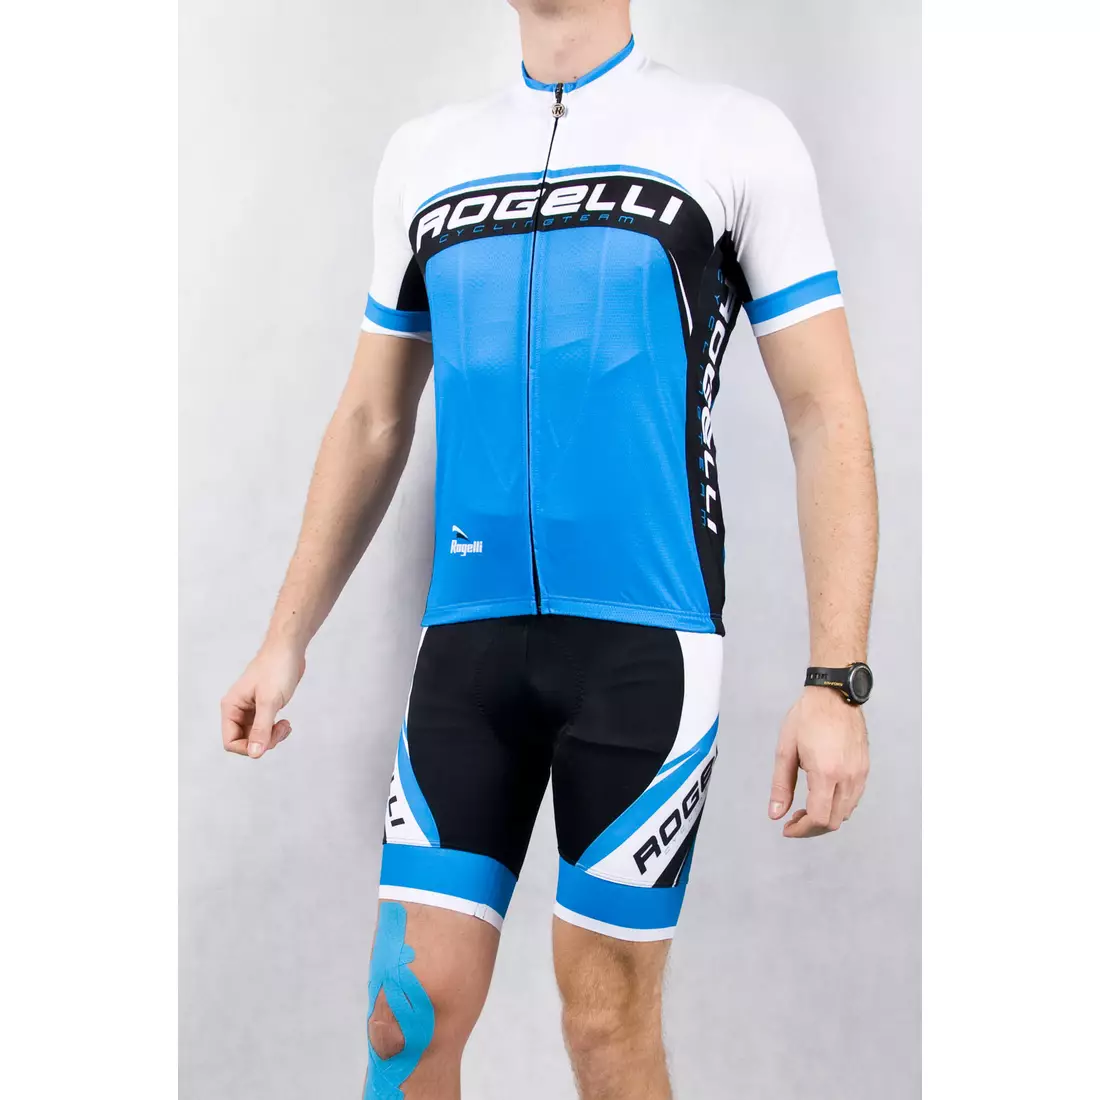 ROGELLI ANCONA - men's cycling jersey, white and blue